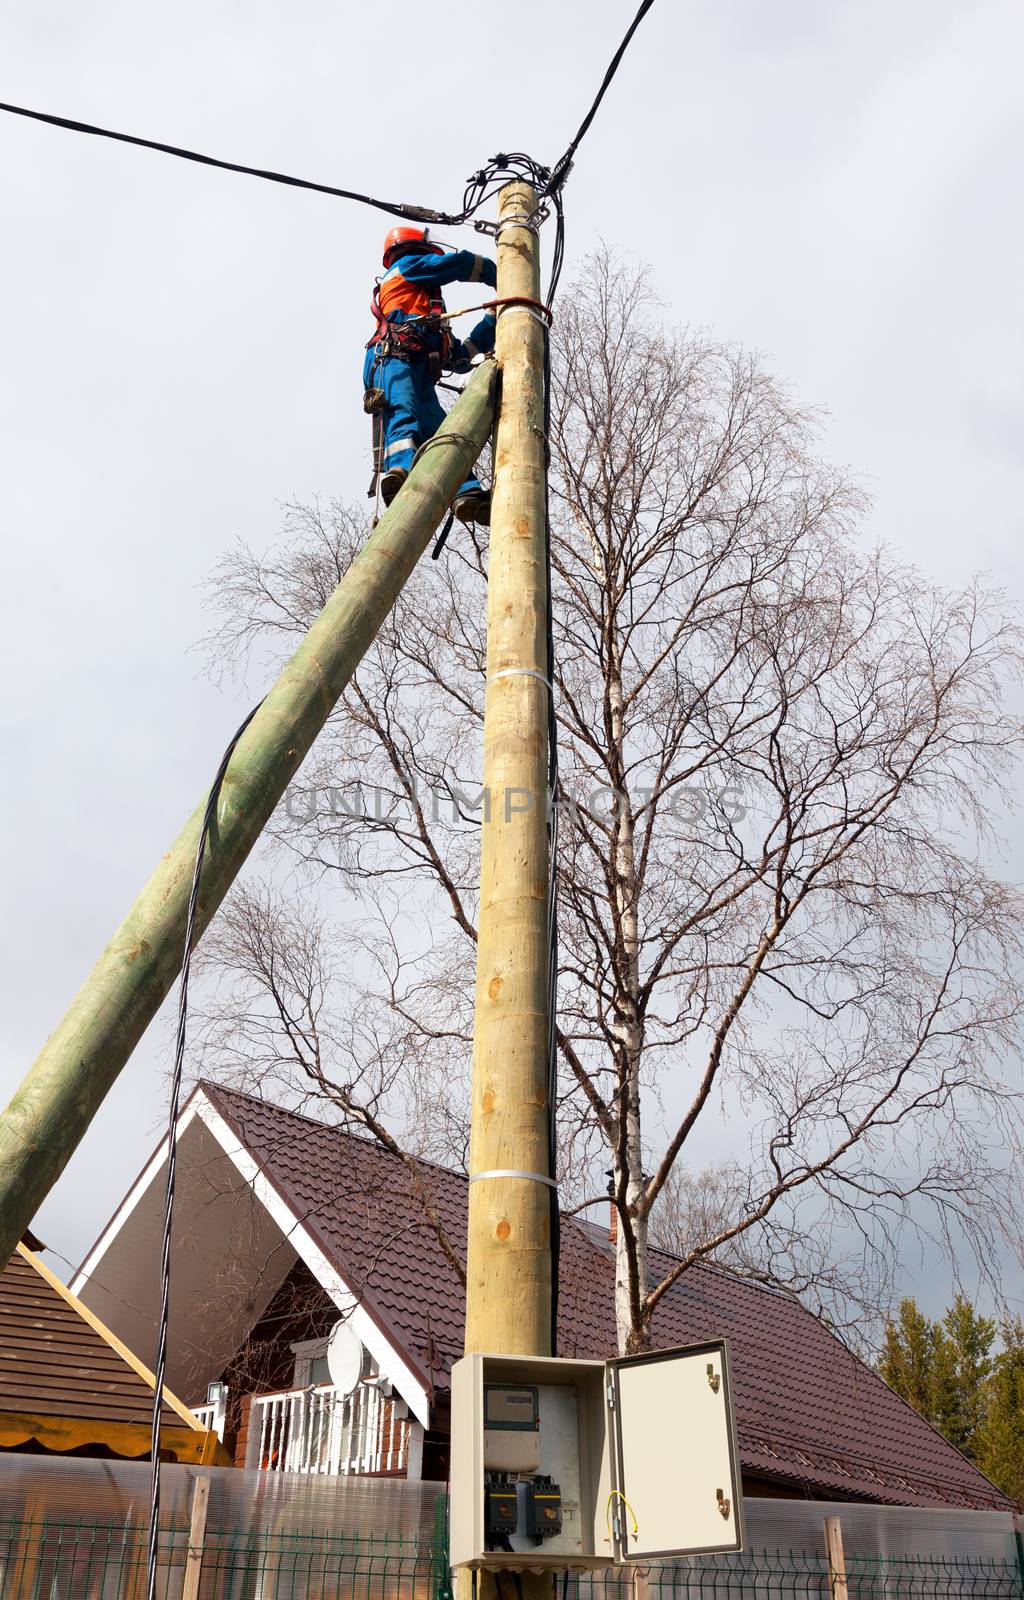 Electrician connects wires on a pole in a country house. Cottage